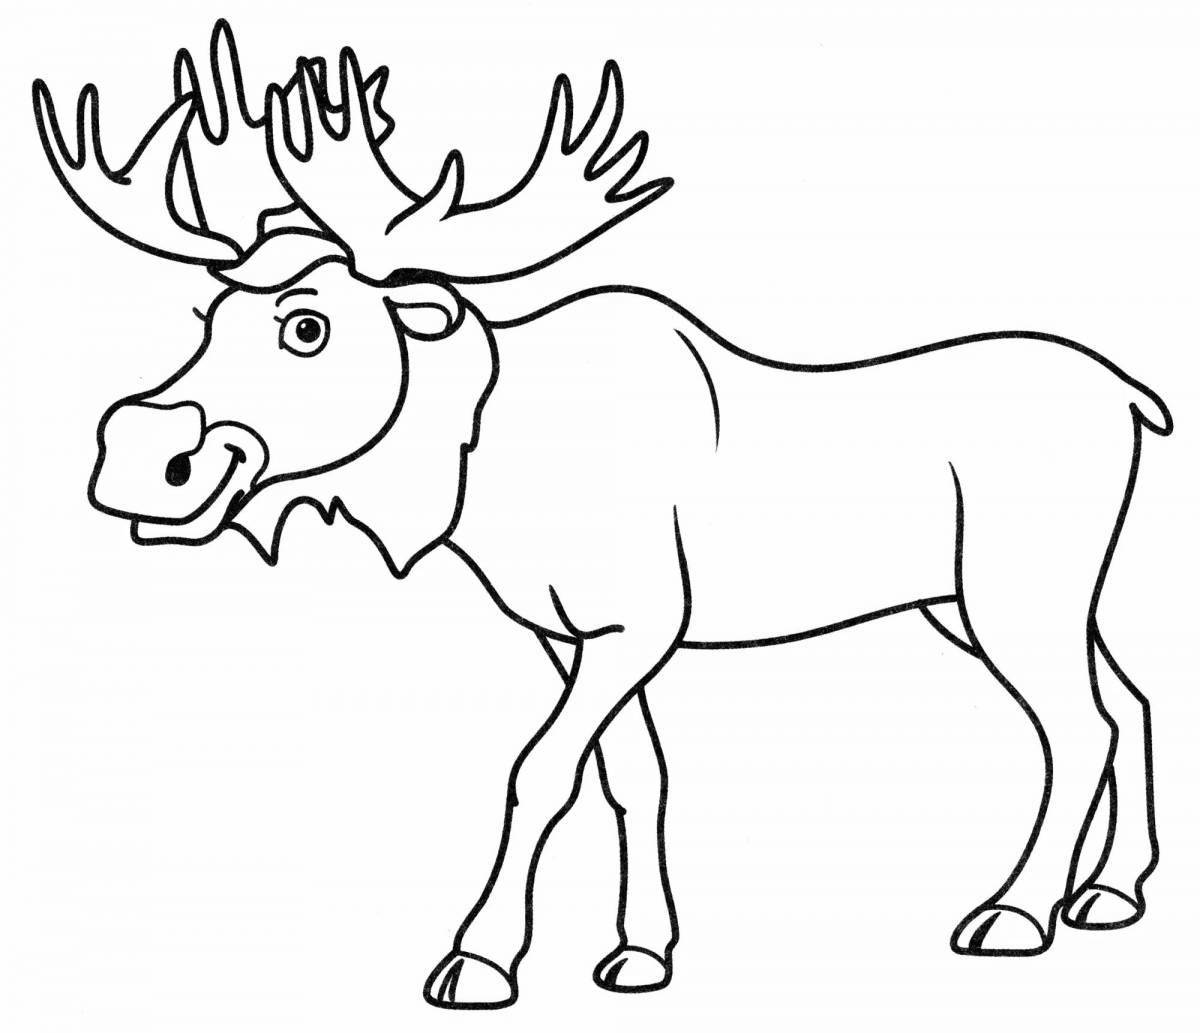 Coloring majestic elk for children 6-7 years old